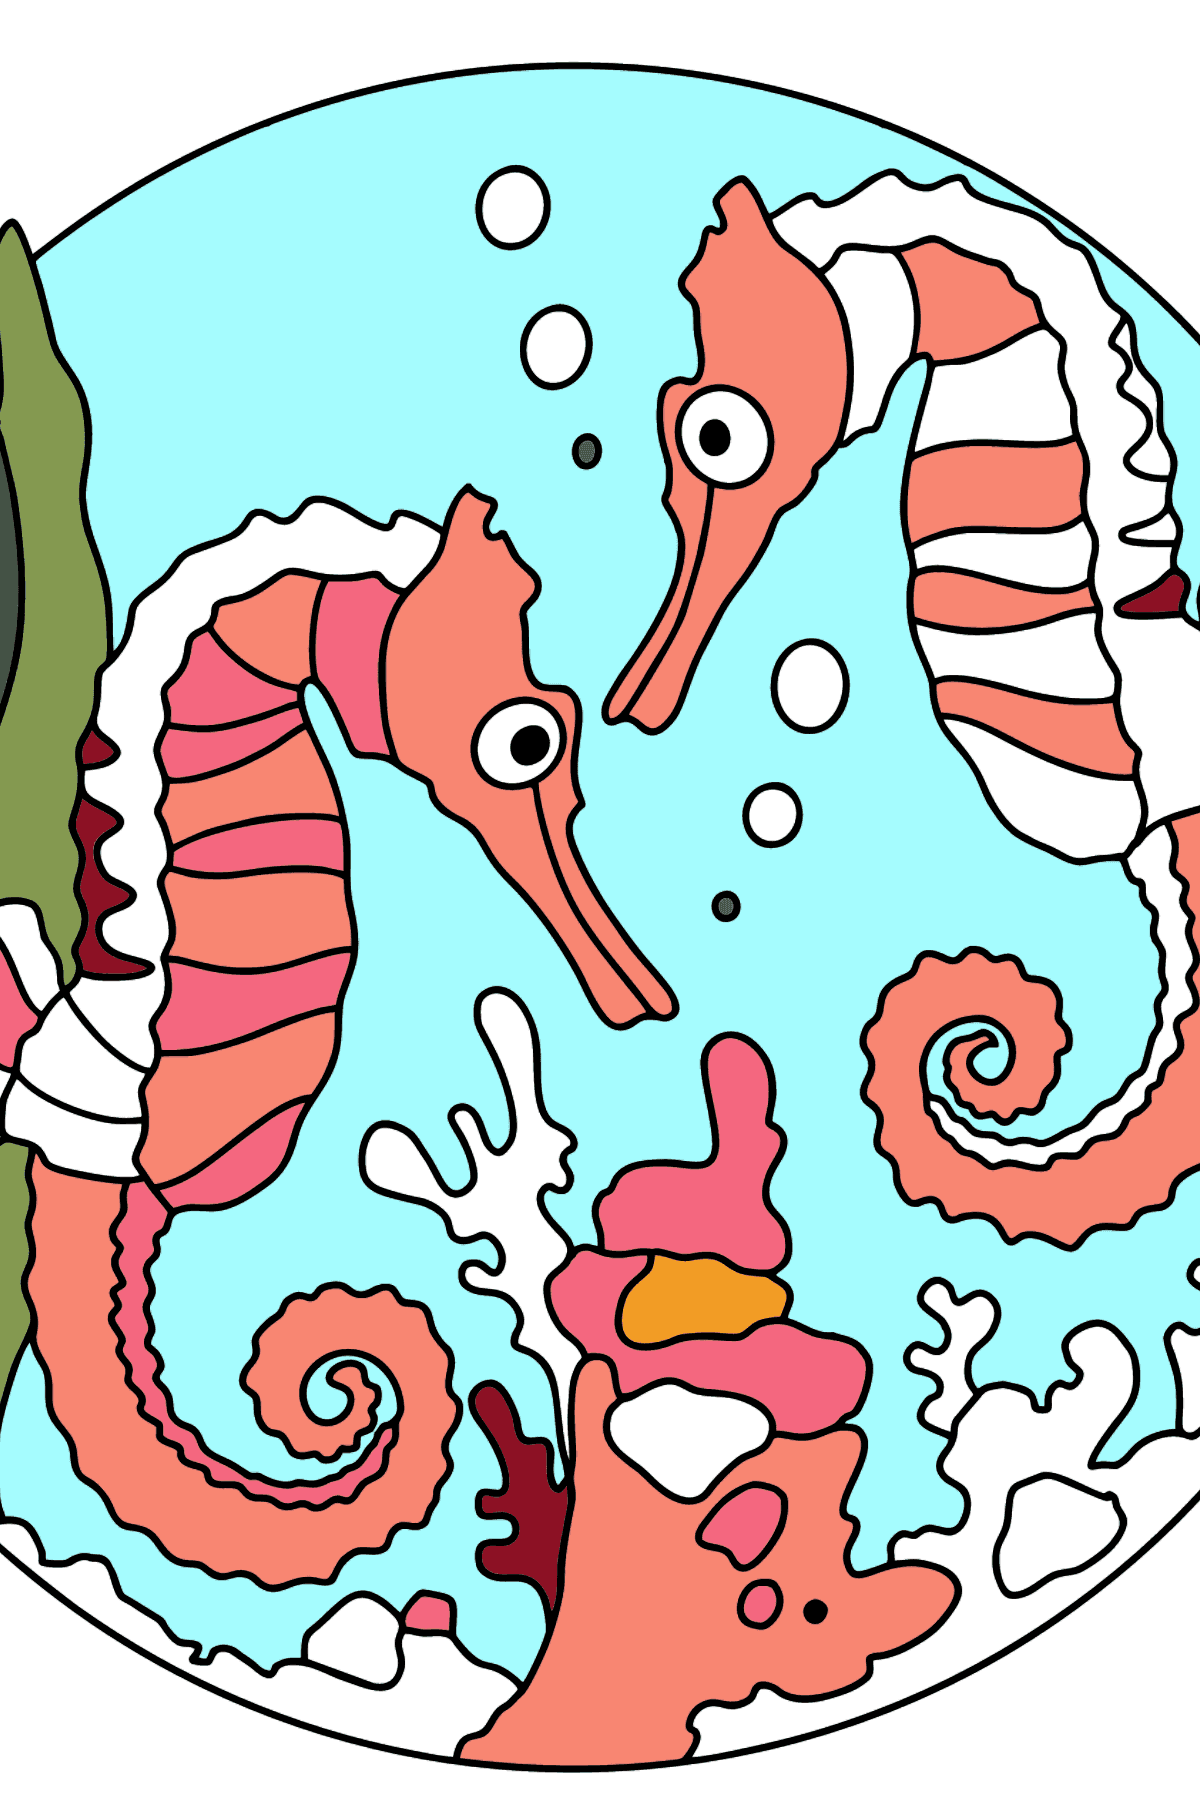 Seahorses Coloring Page (Difficult) - Coloring Pages for Kids